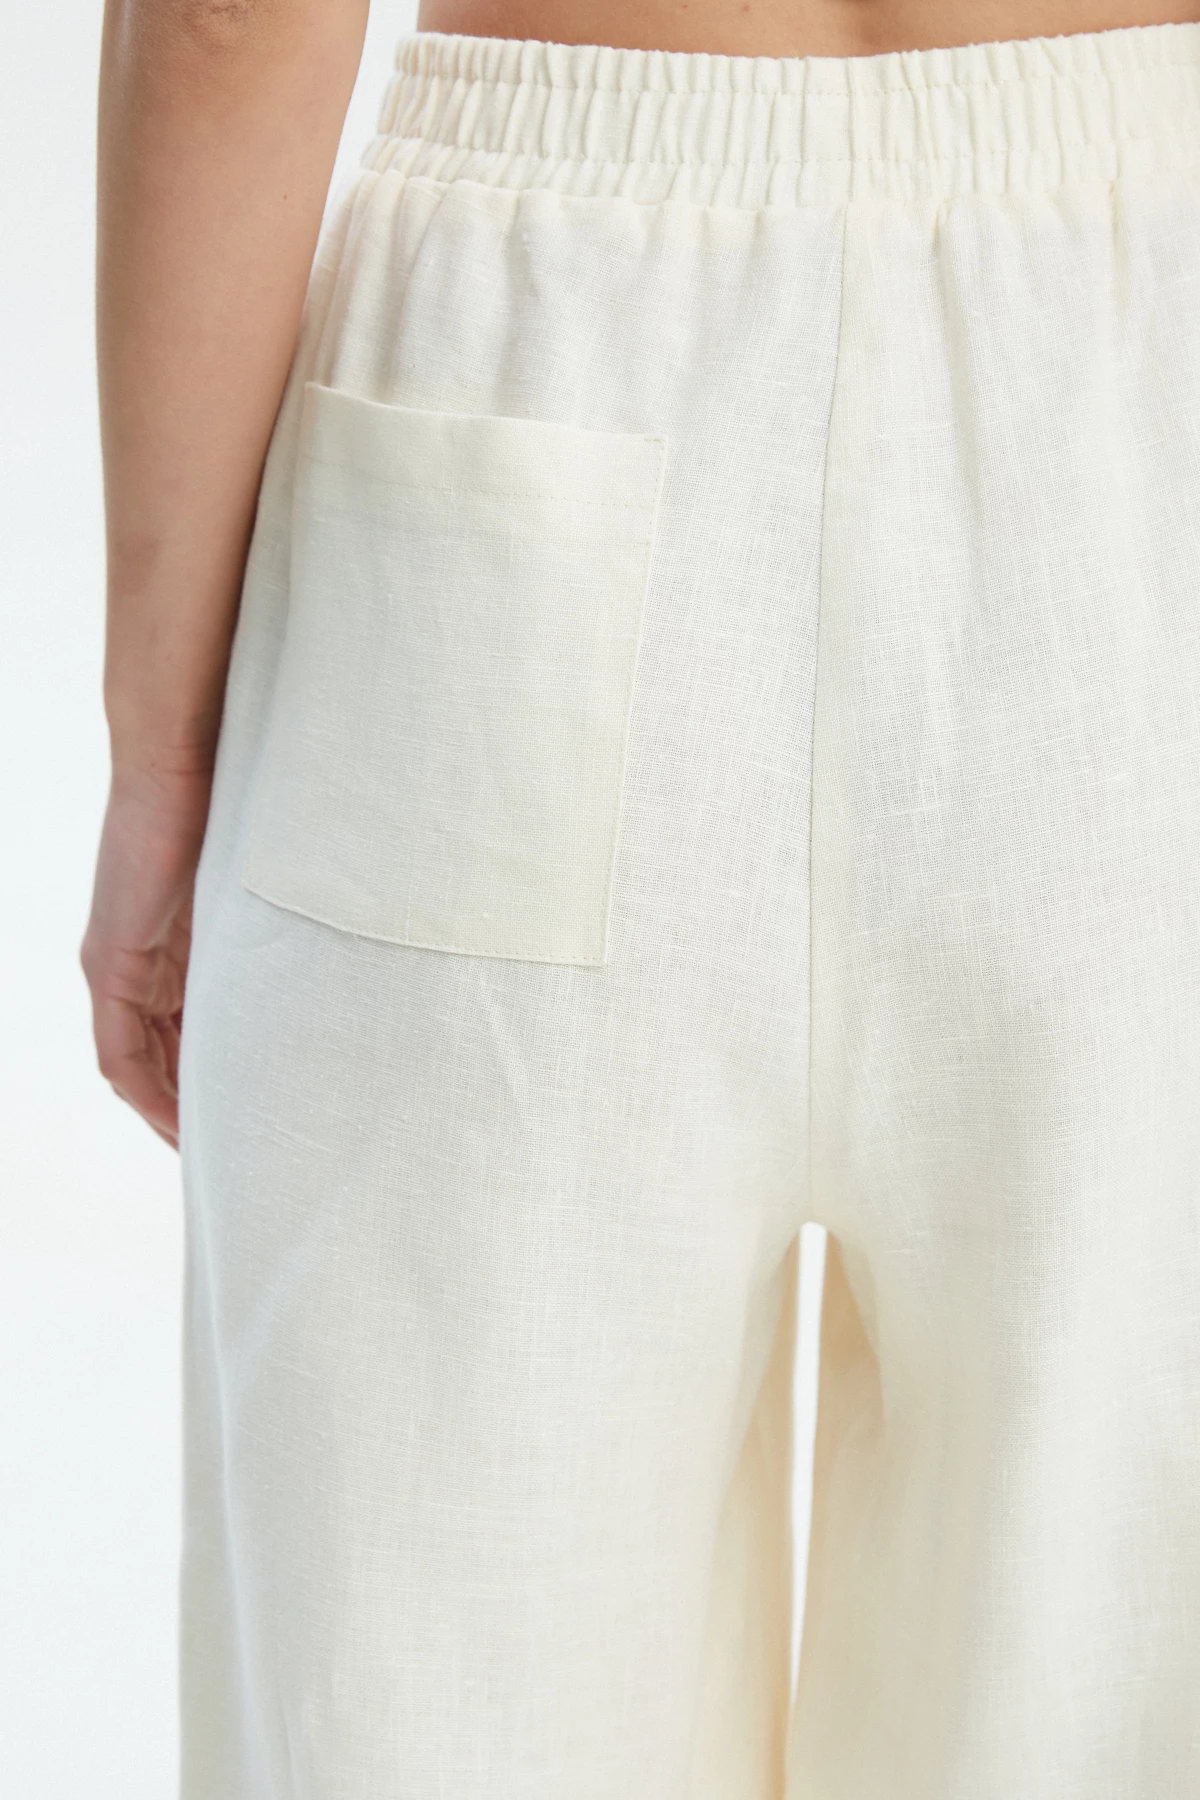 Milky loose-fit pants made of 100% linen, photo 3